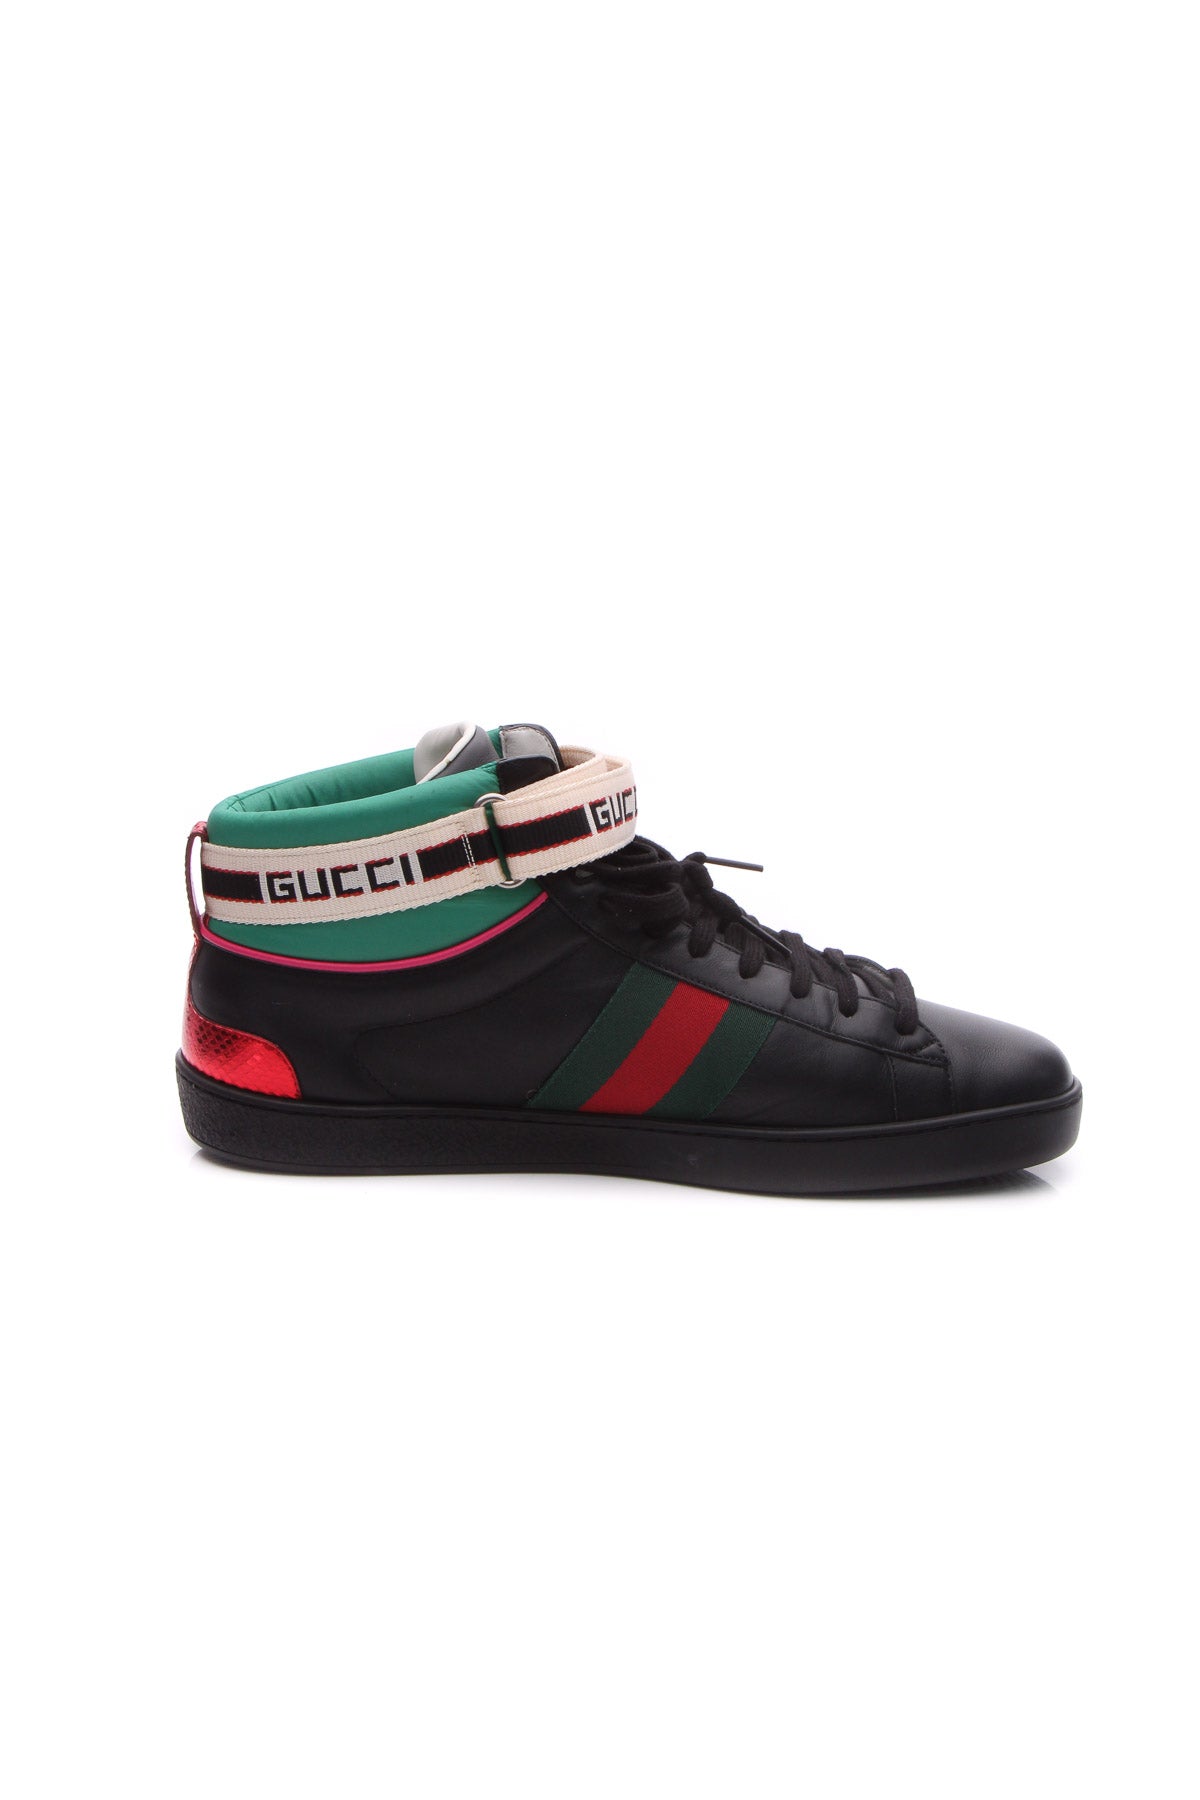 Men's Gucci GG High Top Lace Up Fashion Shoes Sneakers Size